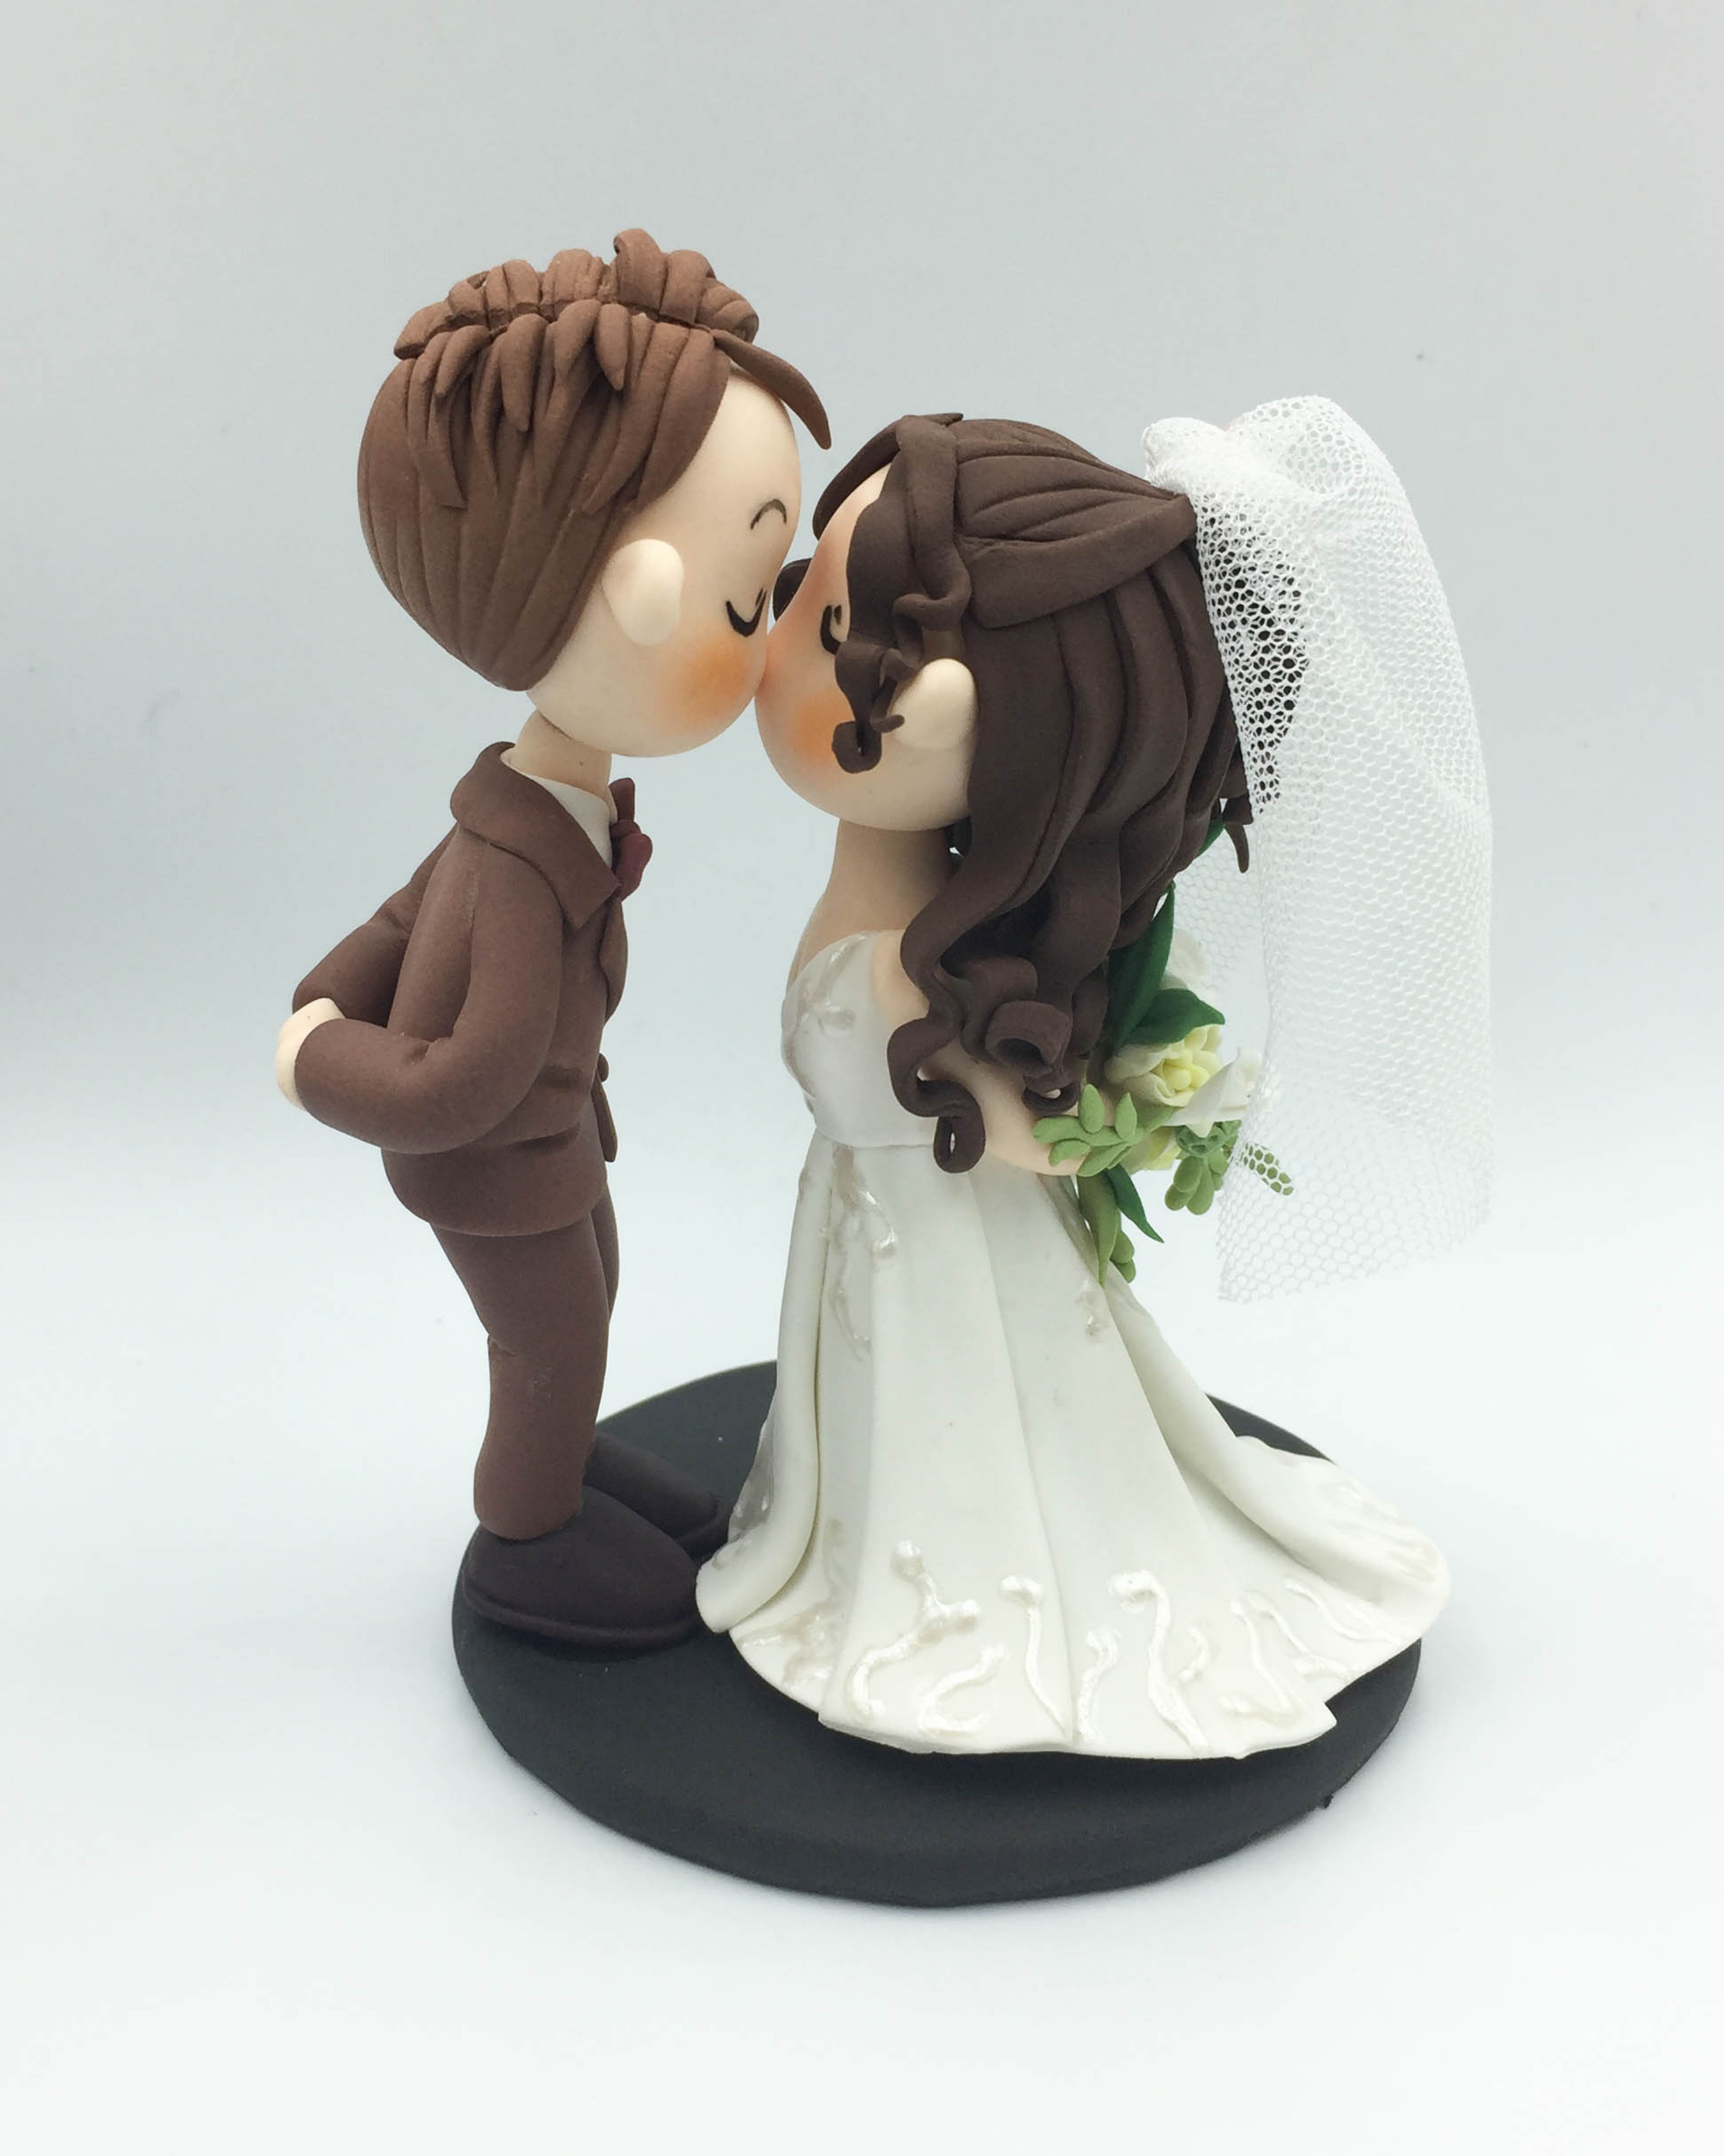 Picture of Rustic Wedding Cake Topper, Kissing Bride and Groom Wedding Figurine